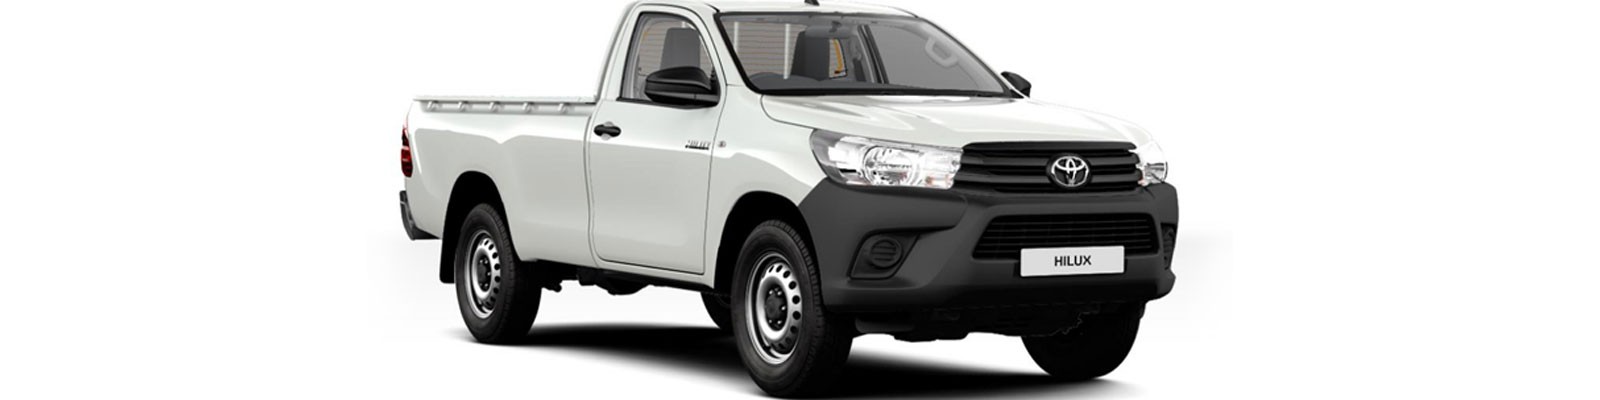 Accessories for Toyota Hilux Single Cab 2016-2020